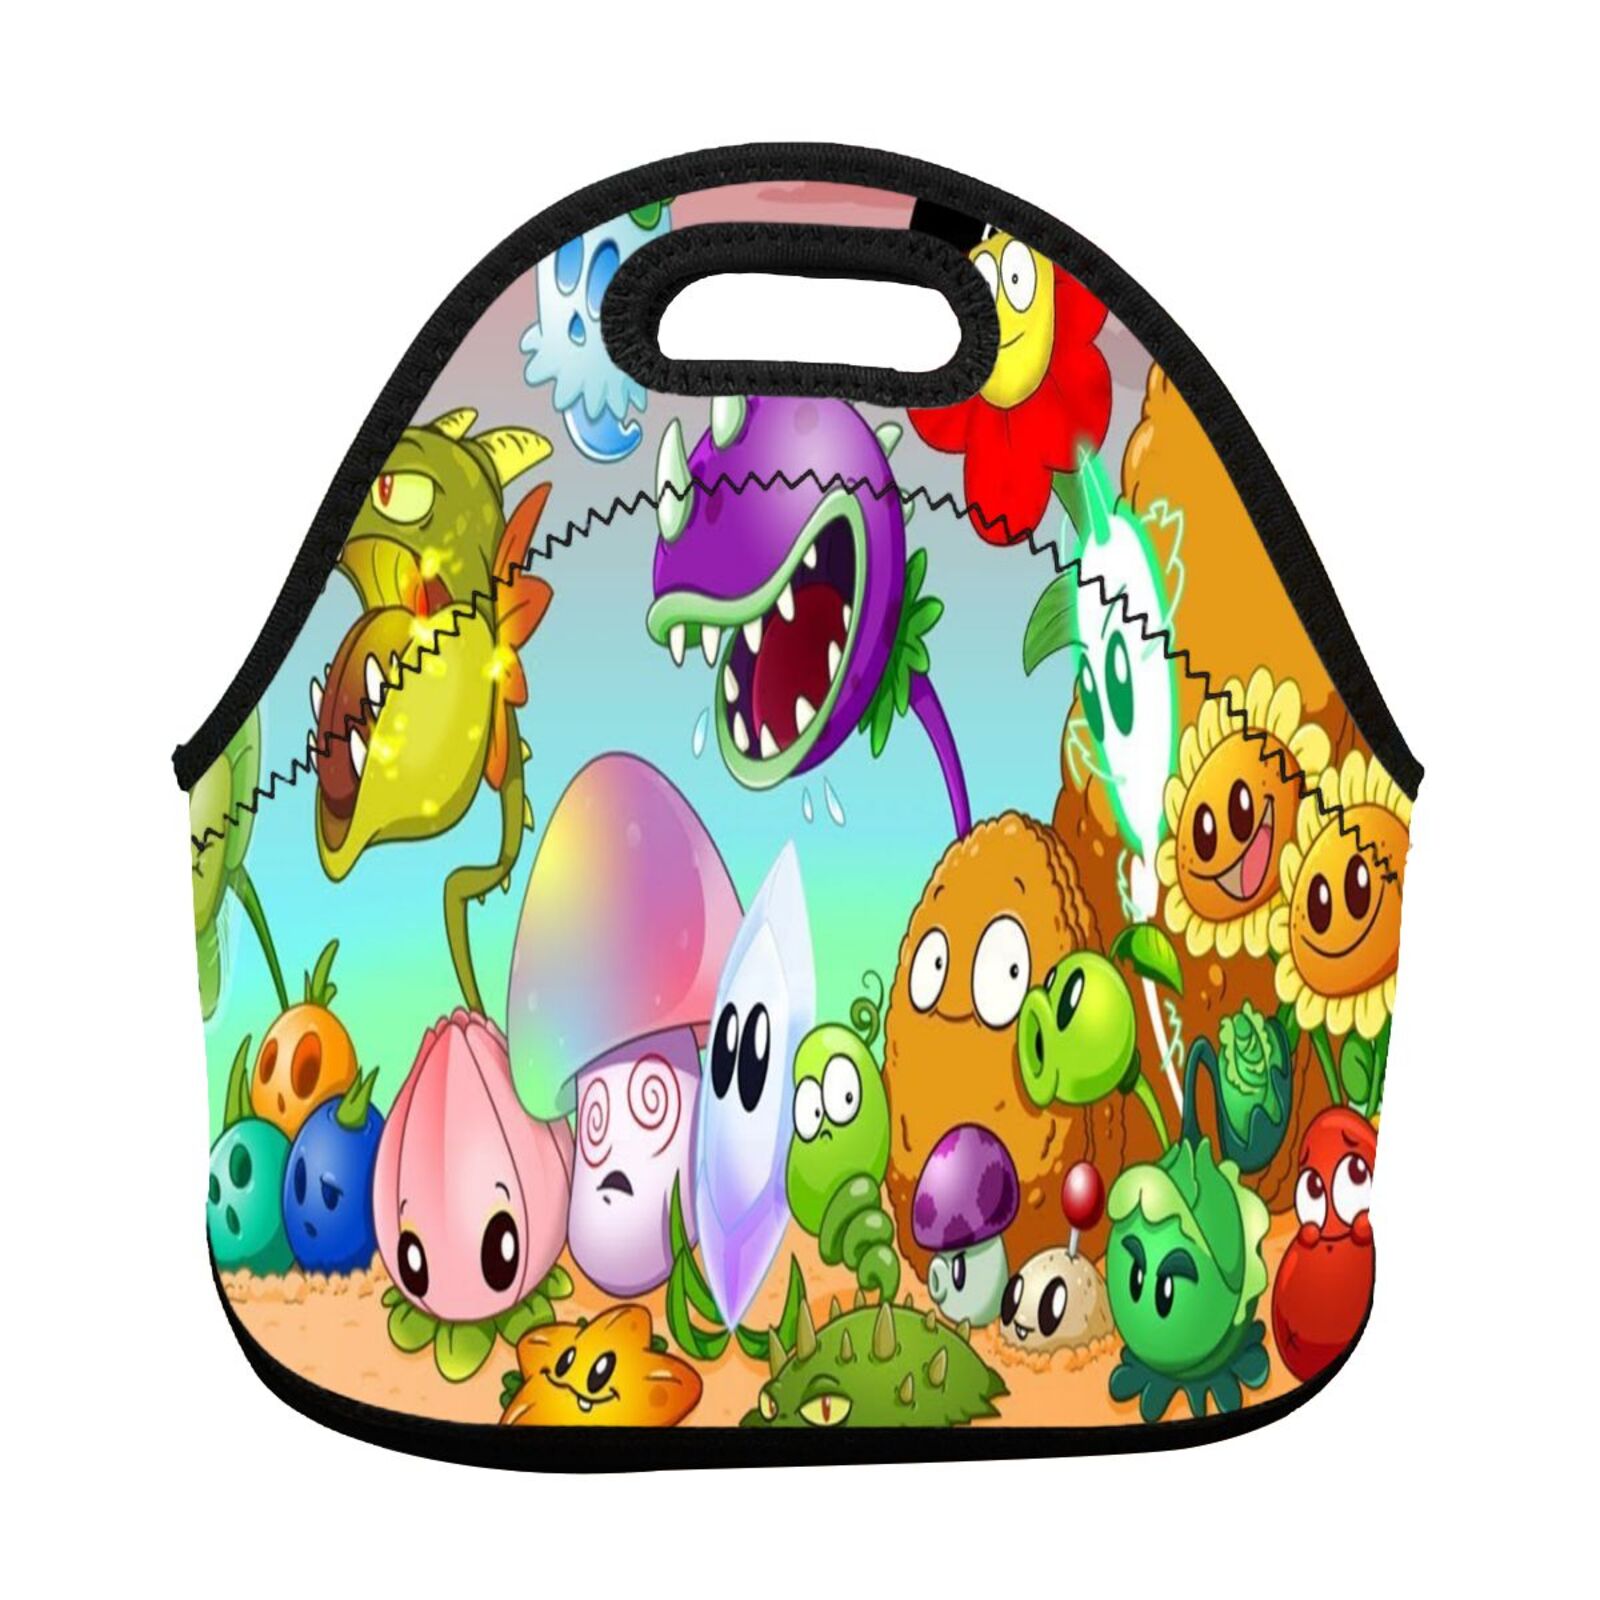 Plants Vs Zombies Lunch Bog Insulated Lunch Box Reusable Cooler Tote ...